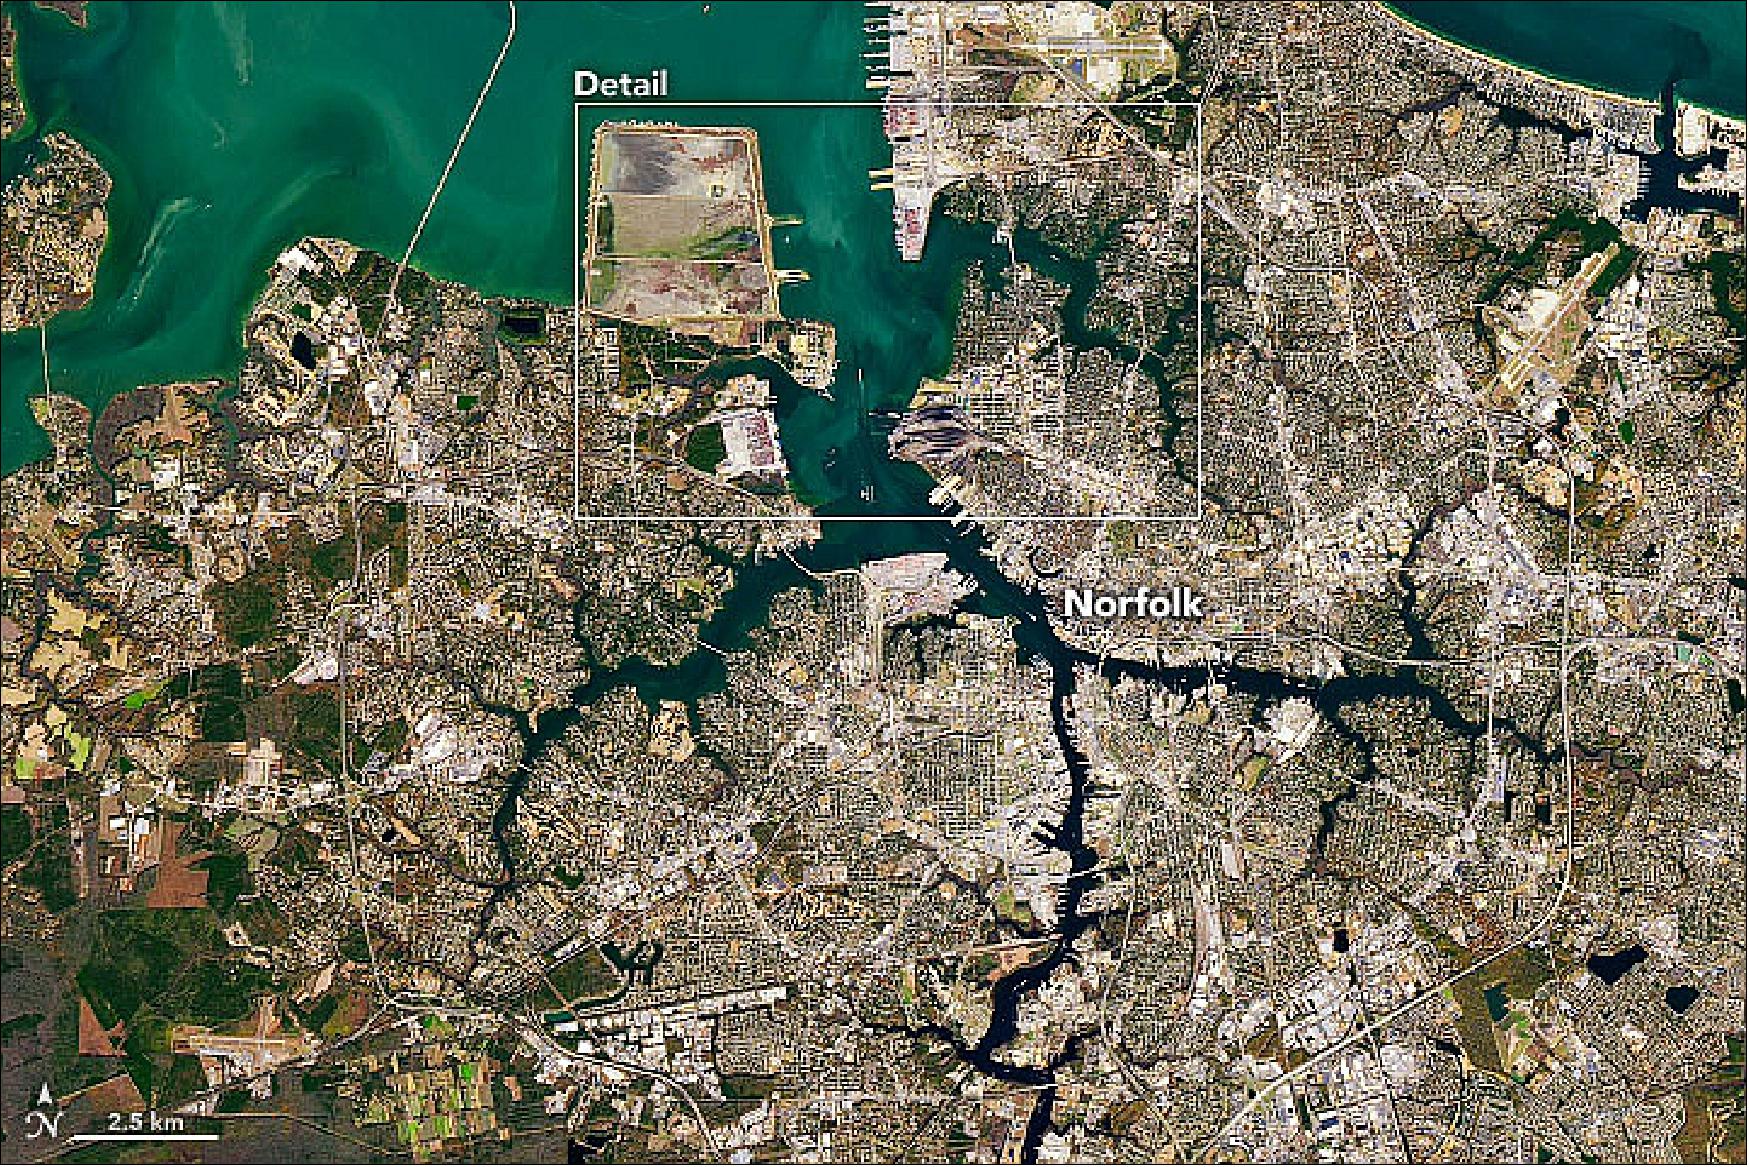 Figure 5: On November 25, 2019, the Operational Land Imager (OLI) on Landsat-8 captured these images (Figures 4 and 5) showing outflow from the Elizabeth River joining the others in Hampton Roads. The deep, natural channels in this area have defined the character of the region by making it possible for ships to access Norfolk and Portsmouth, Virginia (image credit: NASA Earth Observatory, images by Joshua Stevens, using Landsat data from the U.S. Geological Survey. Story by Adam Voiland)